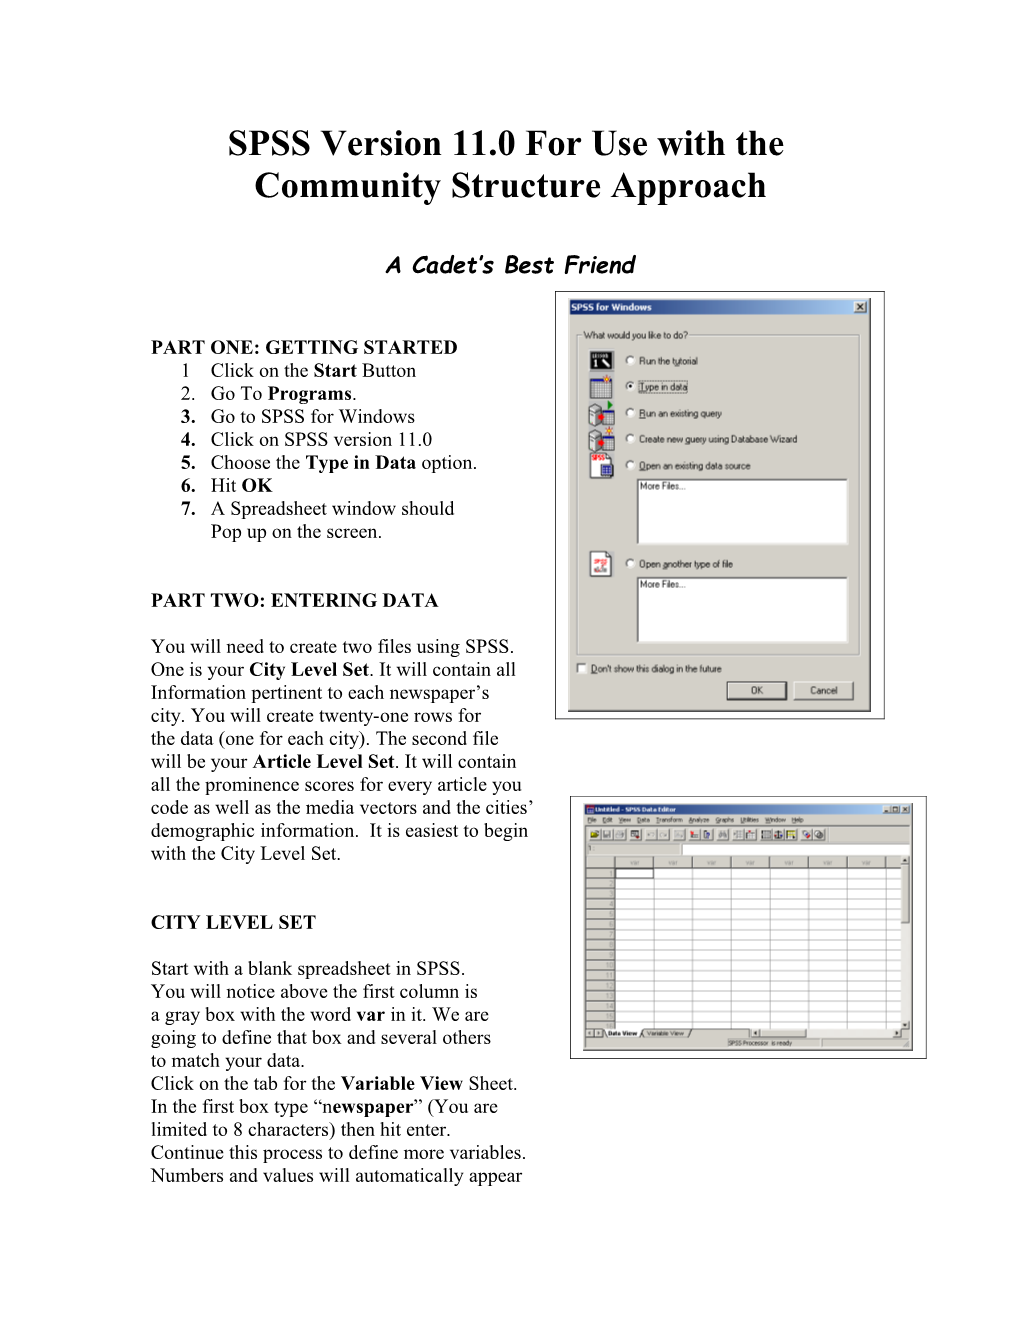 SPSS Version 11.0 for Use with The